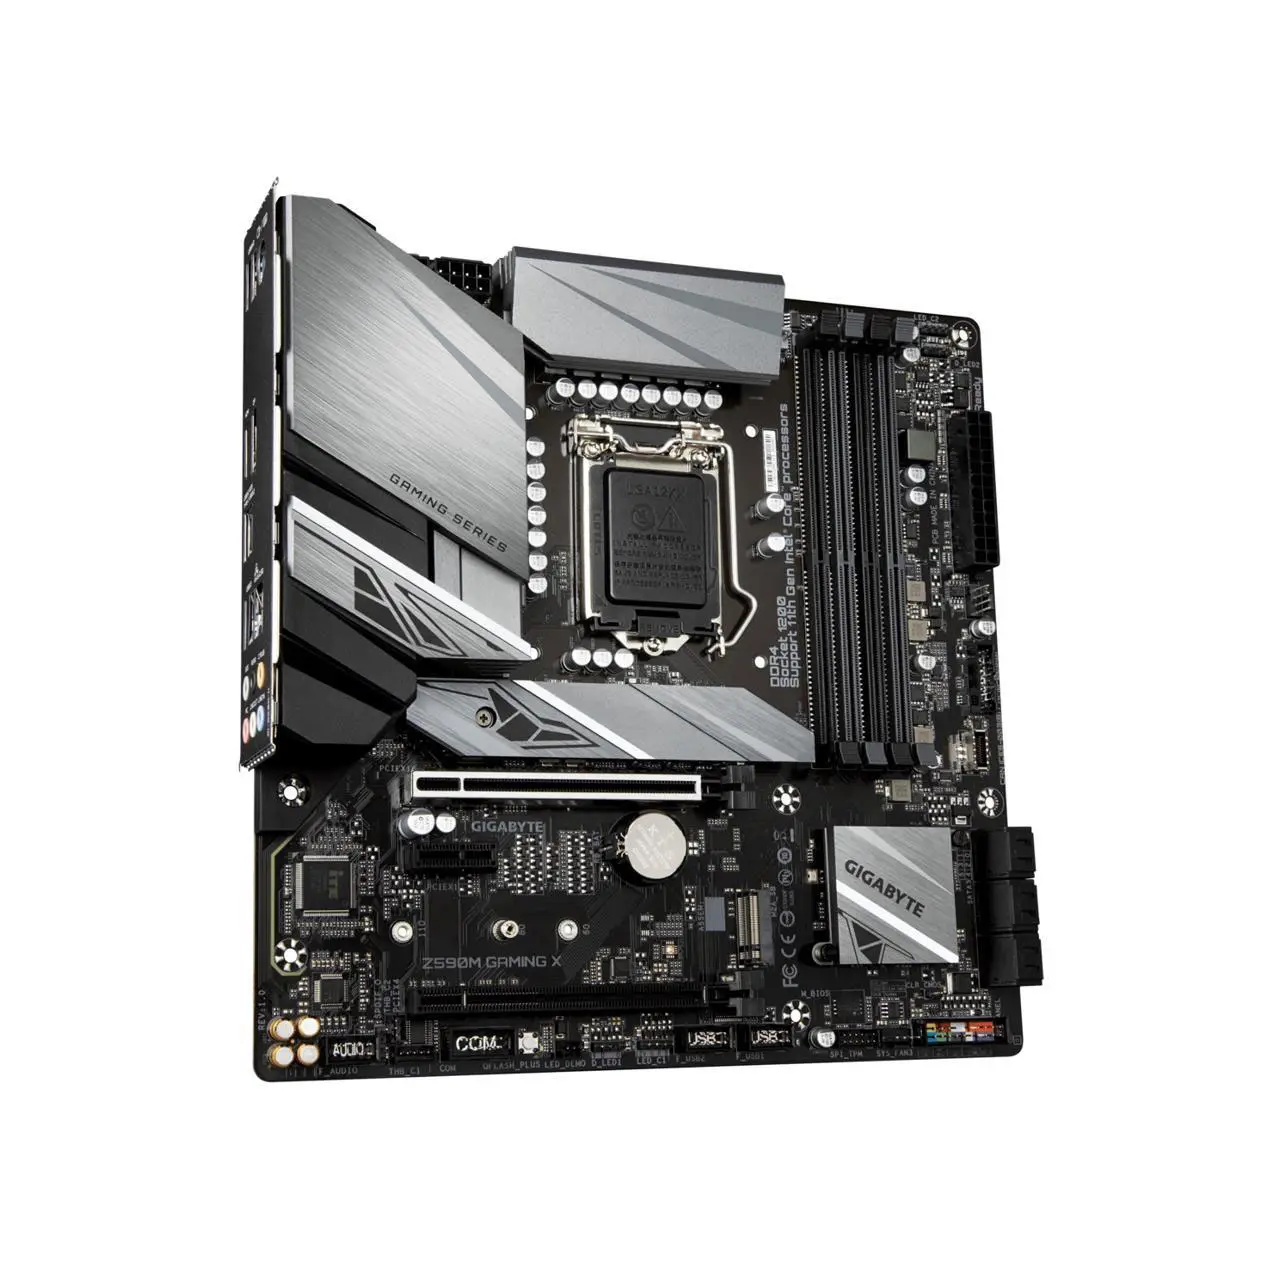 GIGABYTE Z590 Intel Z590 Socket GAMING X Mainboard Motherboard DDR4 Support 10th 11th Gen CPU PCI-E 4.0 128GB Industrial Double